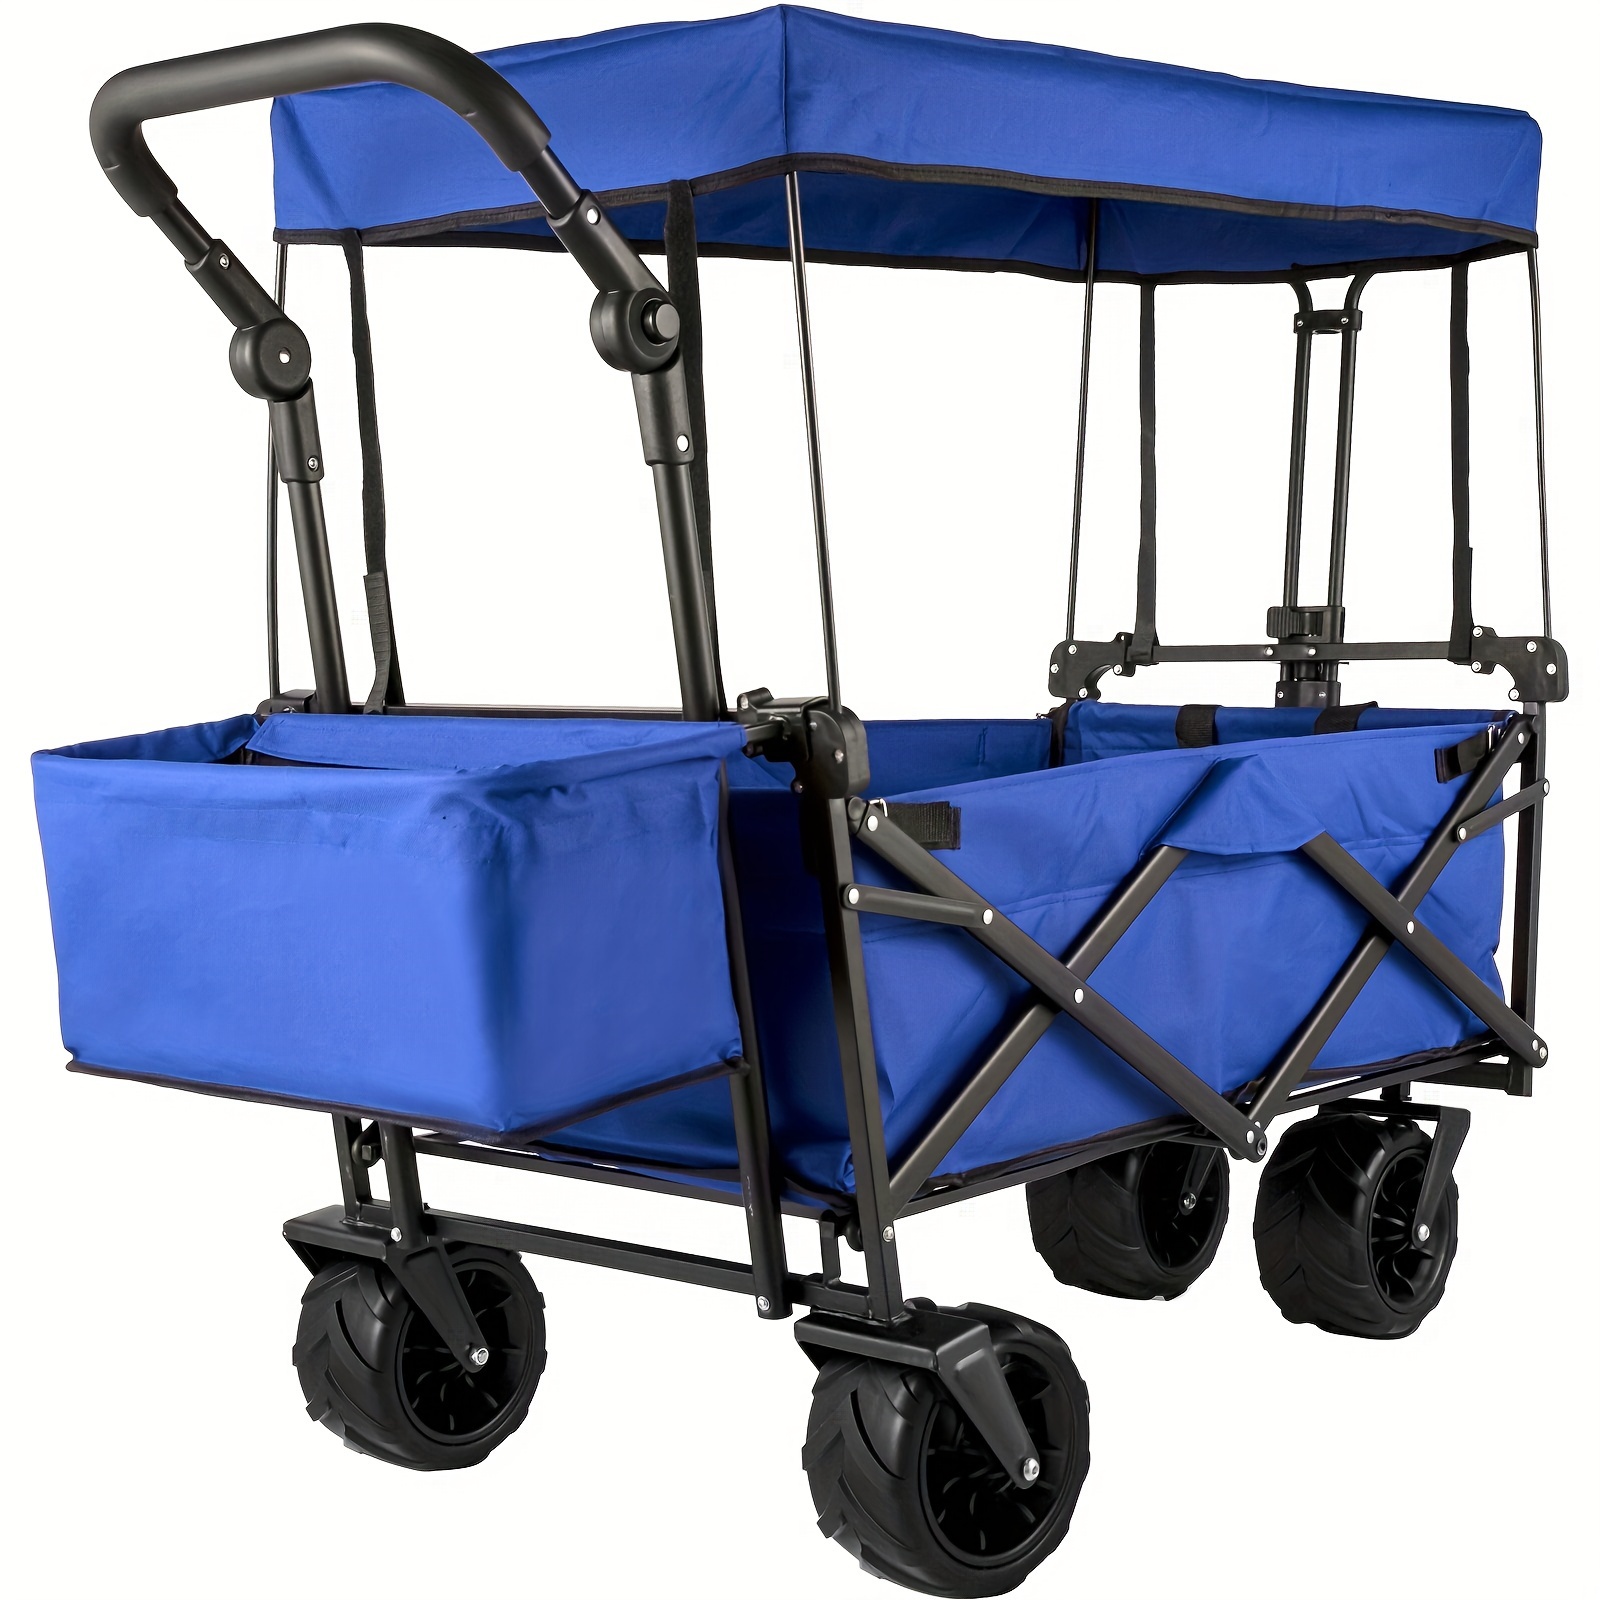 

Extra Large Collapsible Garden Cart With Removable Canopy, Folding Wagon Utility Carts With Wheels And Rear Storage, Wagon Cart For Garden, Camping, Grocery Cart, Shopping Cart, Blue